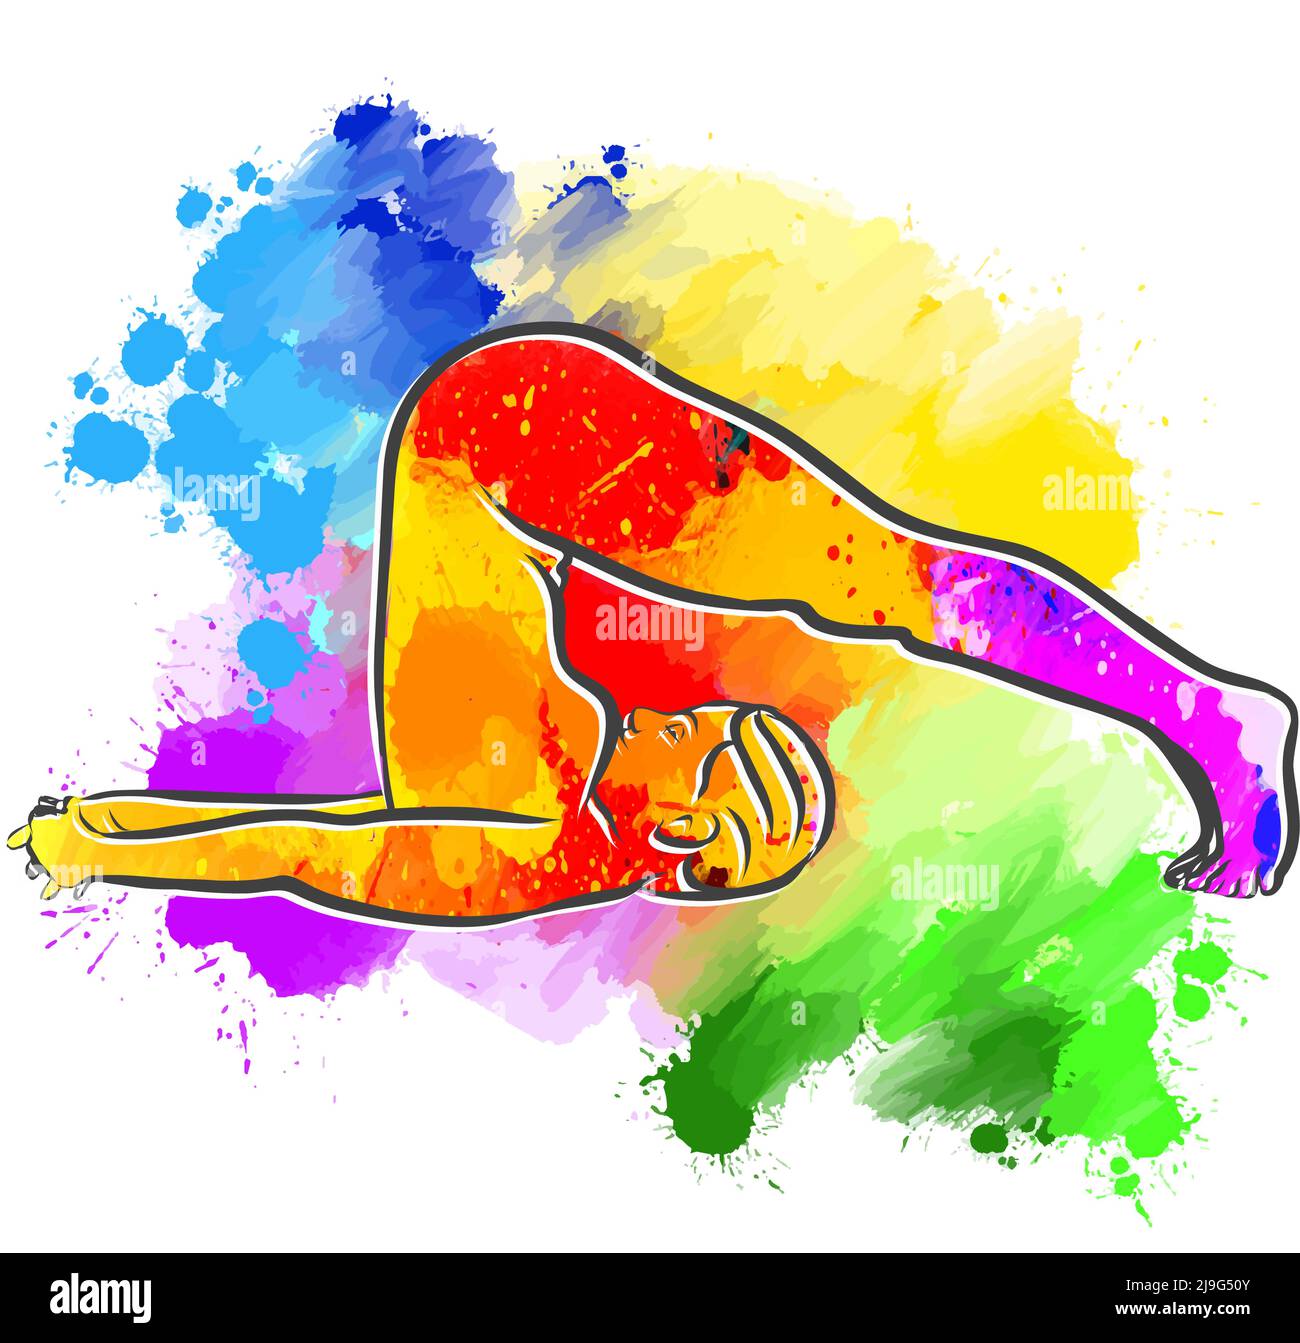 Colorful Halasana Plow Yoga Pose. Hand drawn vector art. Centered layout for web and print purposes. Stock Vector